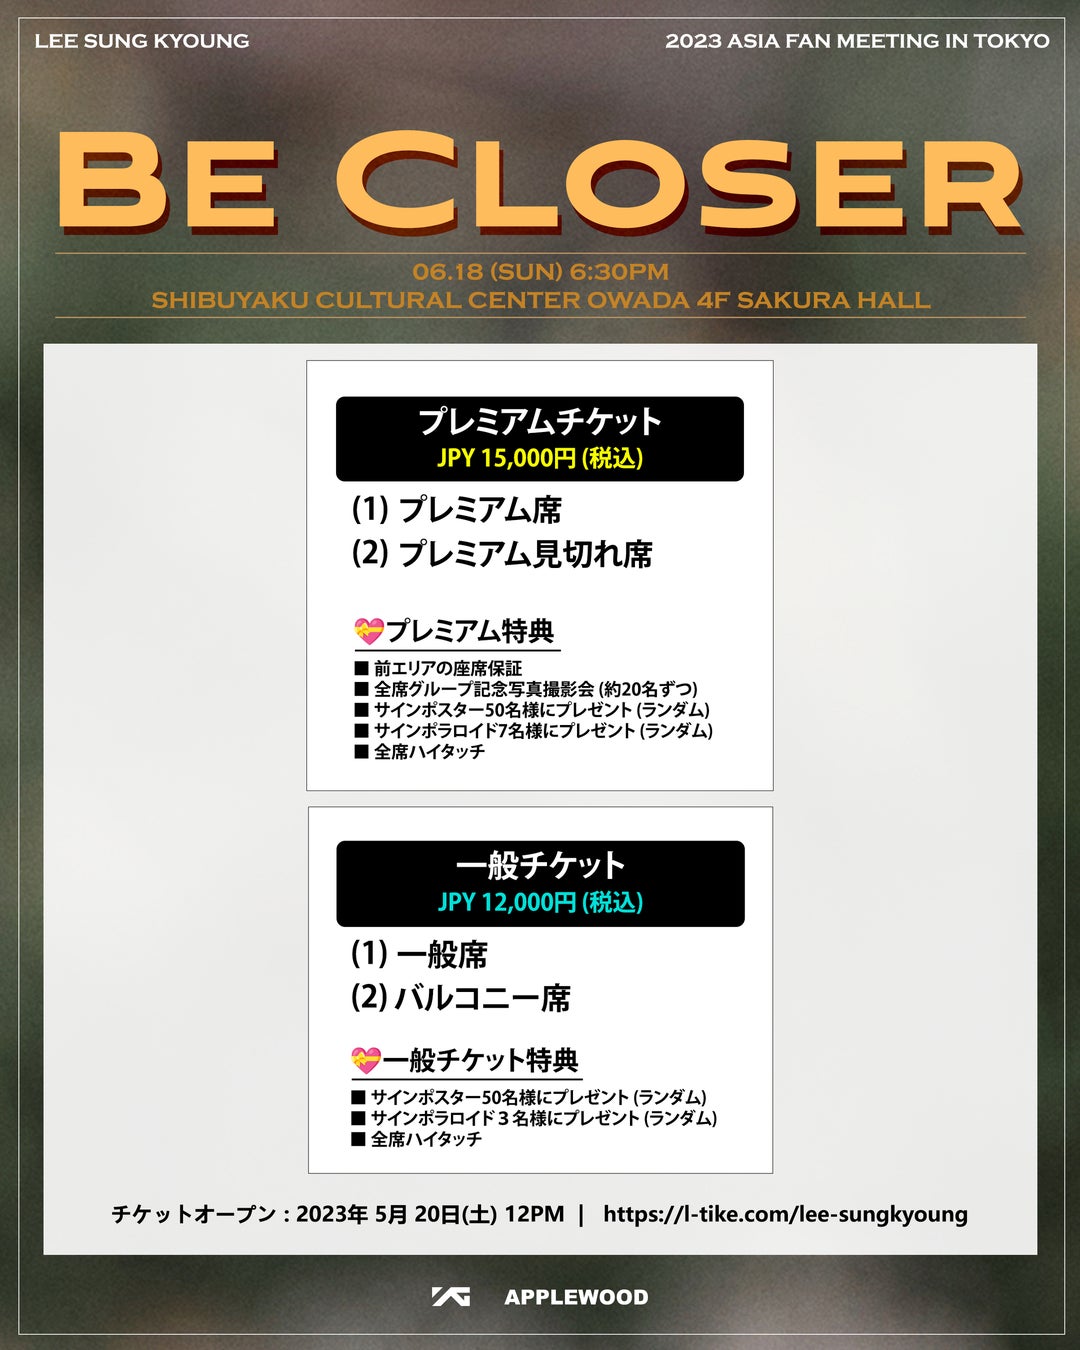 2023 LEE SUNG KYOUNG ASIA FAN MEETING [BE CLOSER] in TOKYO 開催決定！のサブ画像2